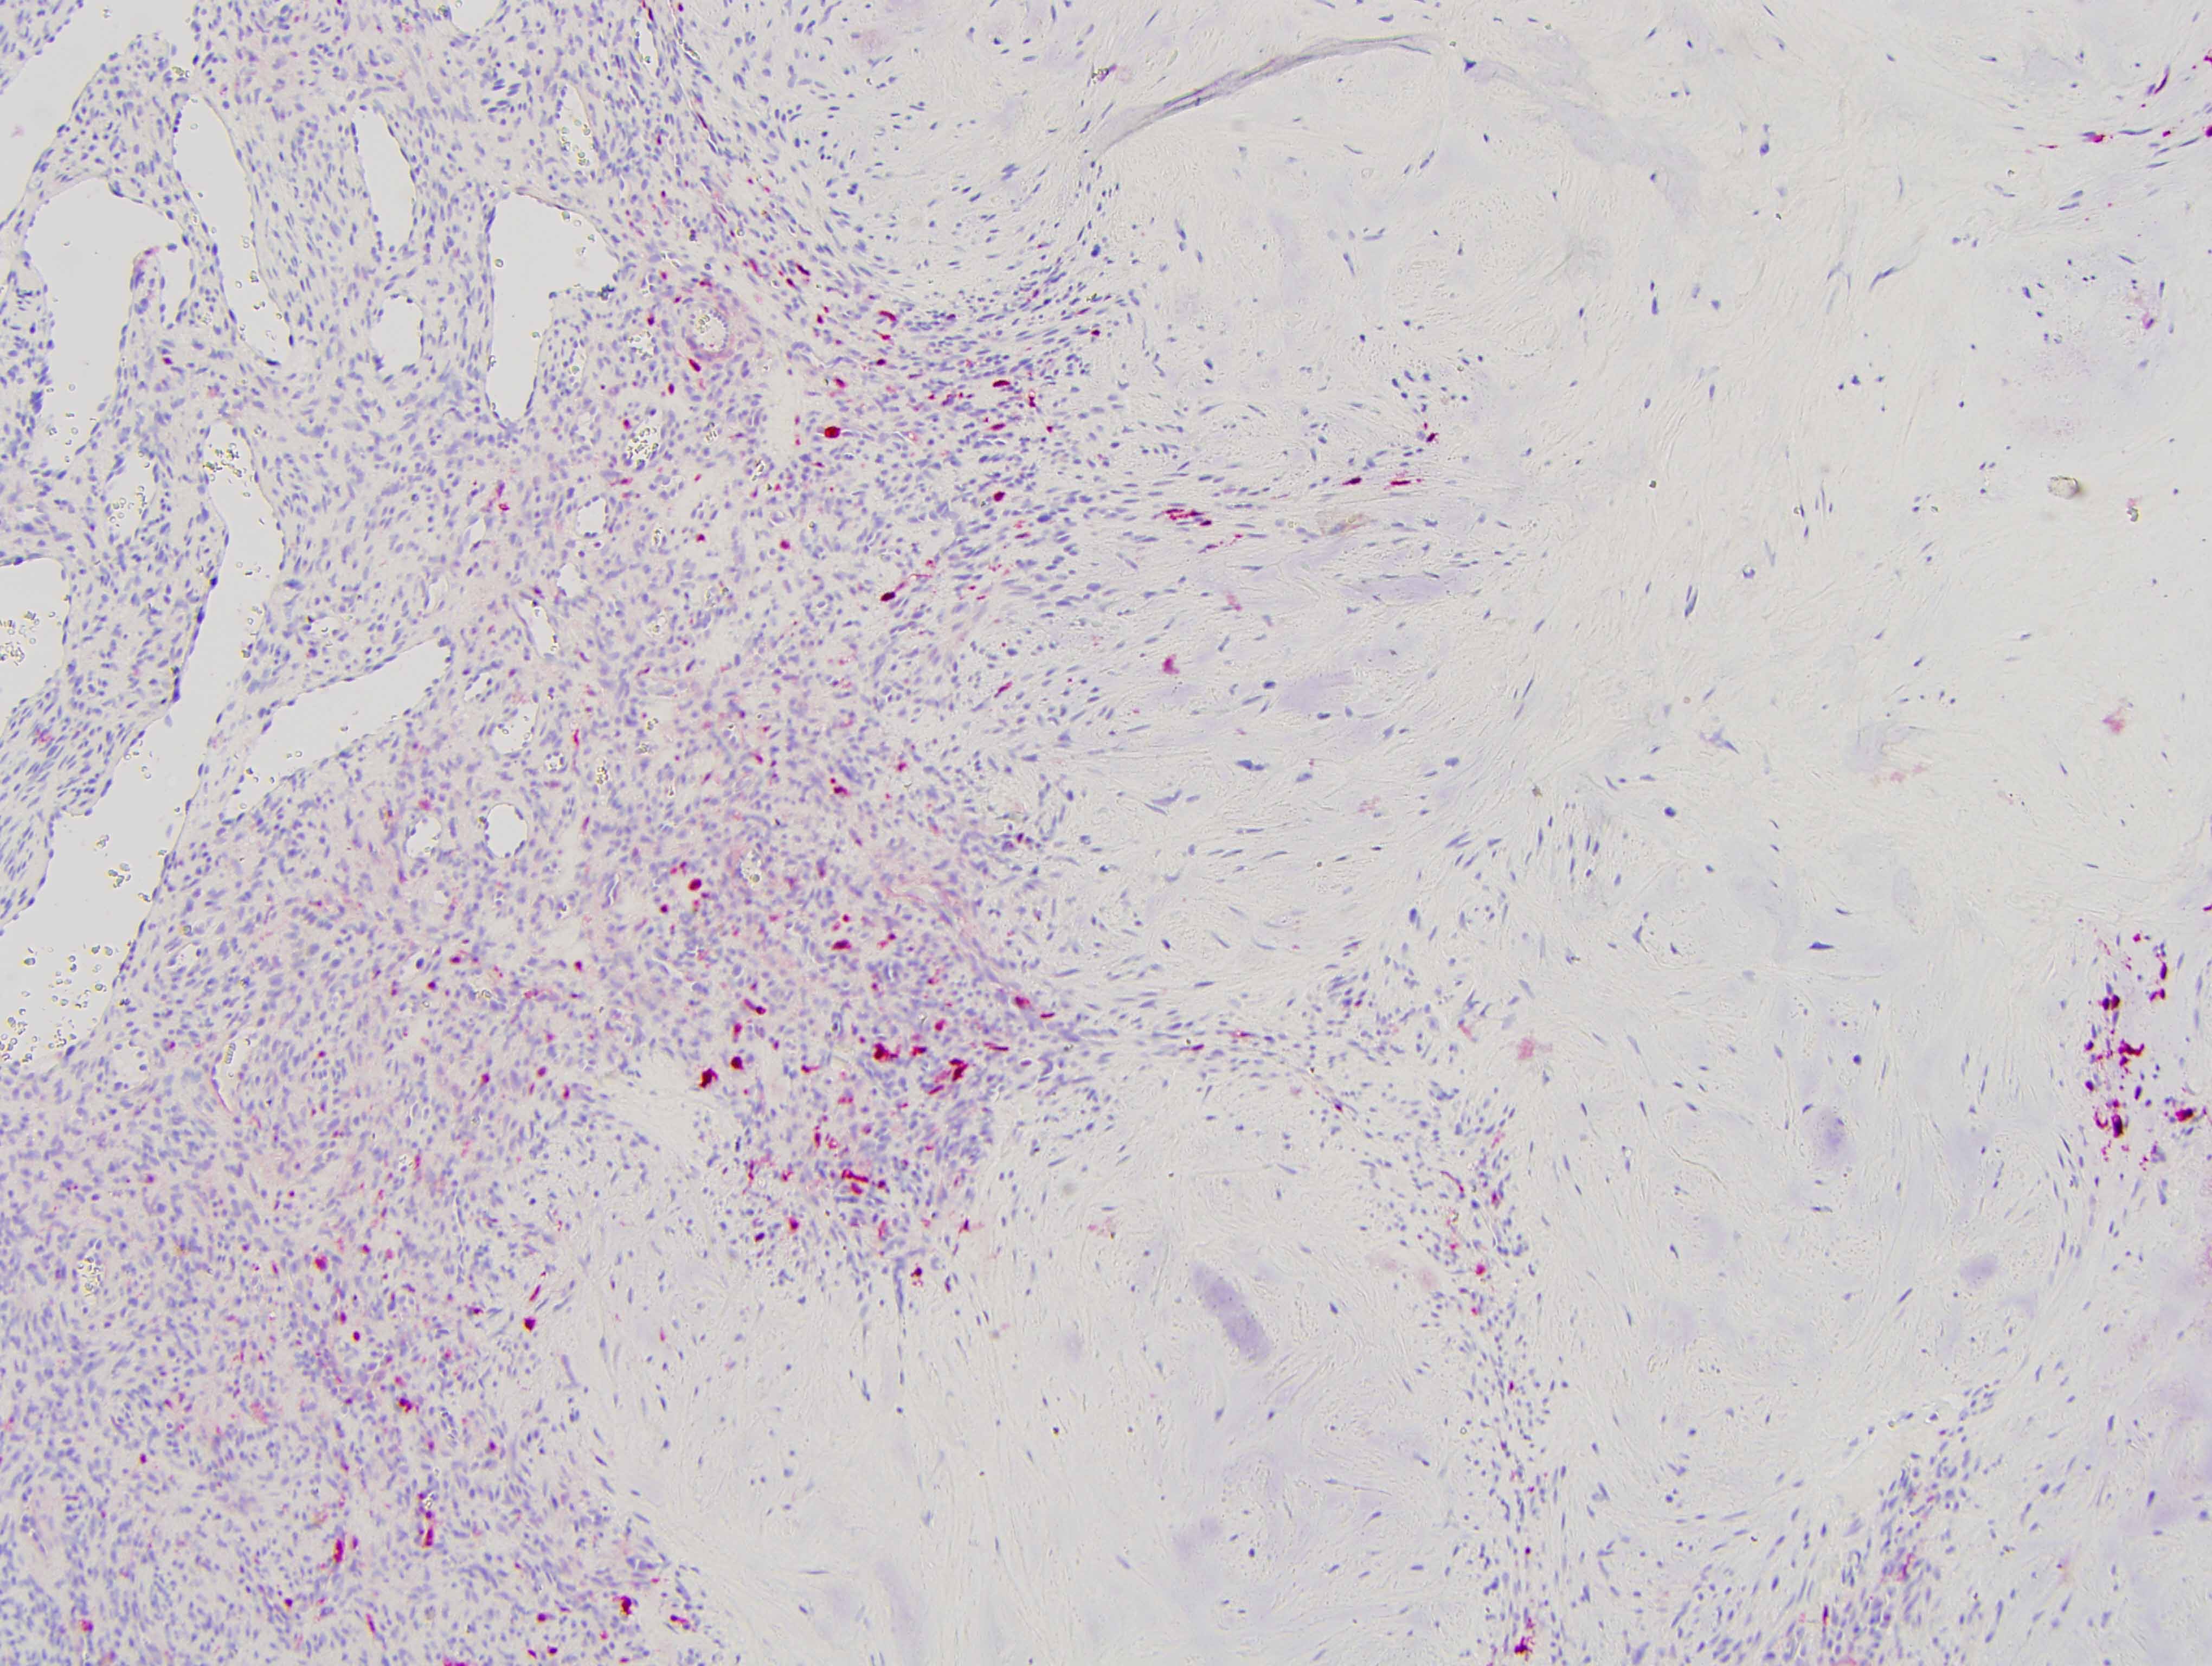 Slide 7: There are a smattering of S-100 positive appearing cells throughout the lesion.